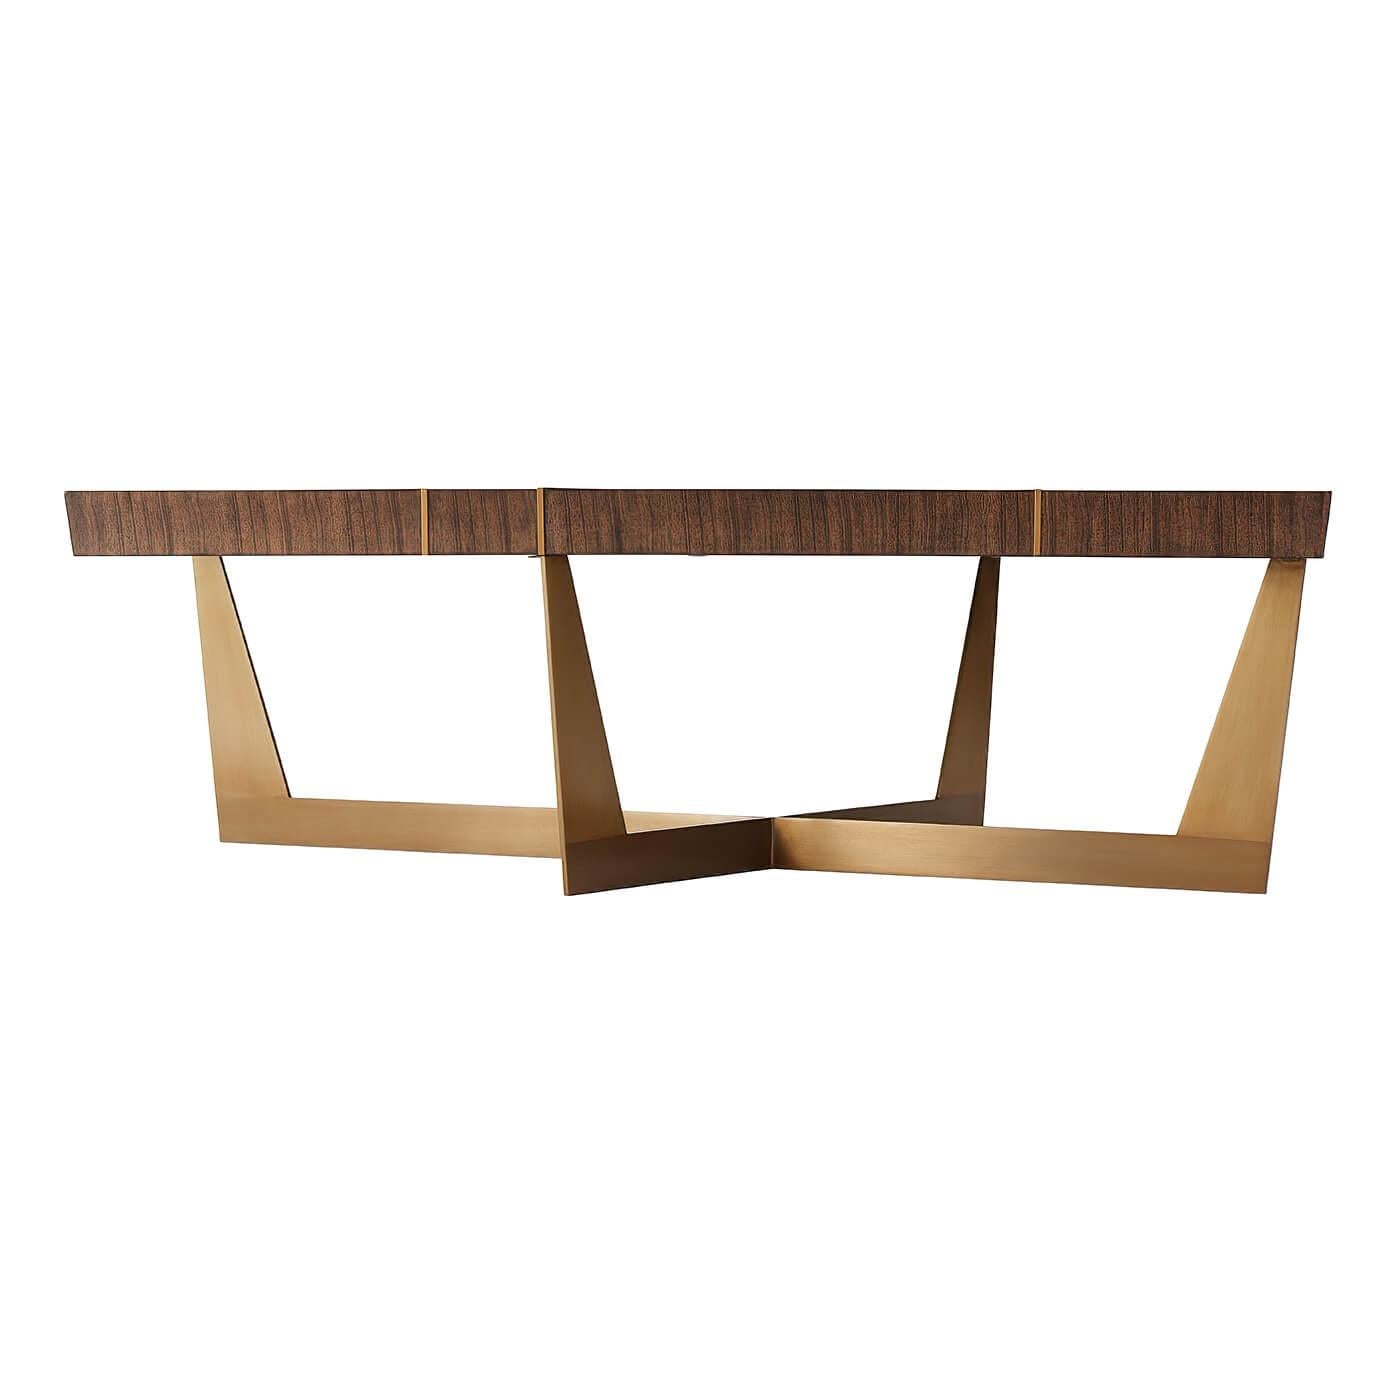 Modern coffee table with an angled edge rectangular slab top, with intersecting brass inlaid relief lines on an angled brass finish steel base.

Dimensions: 52